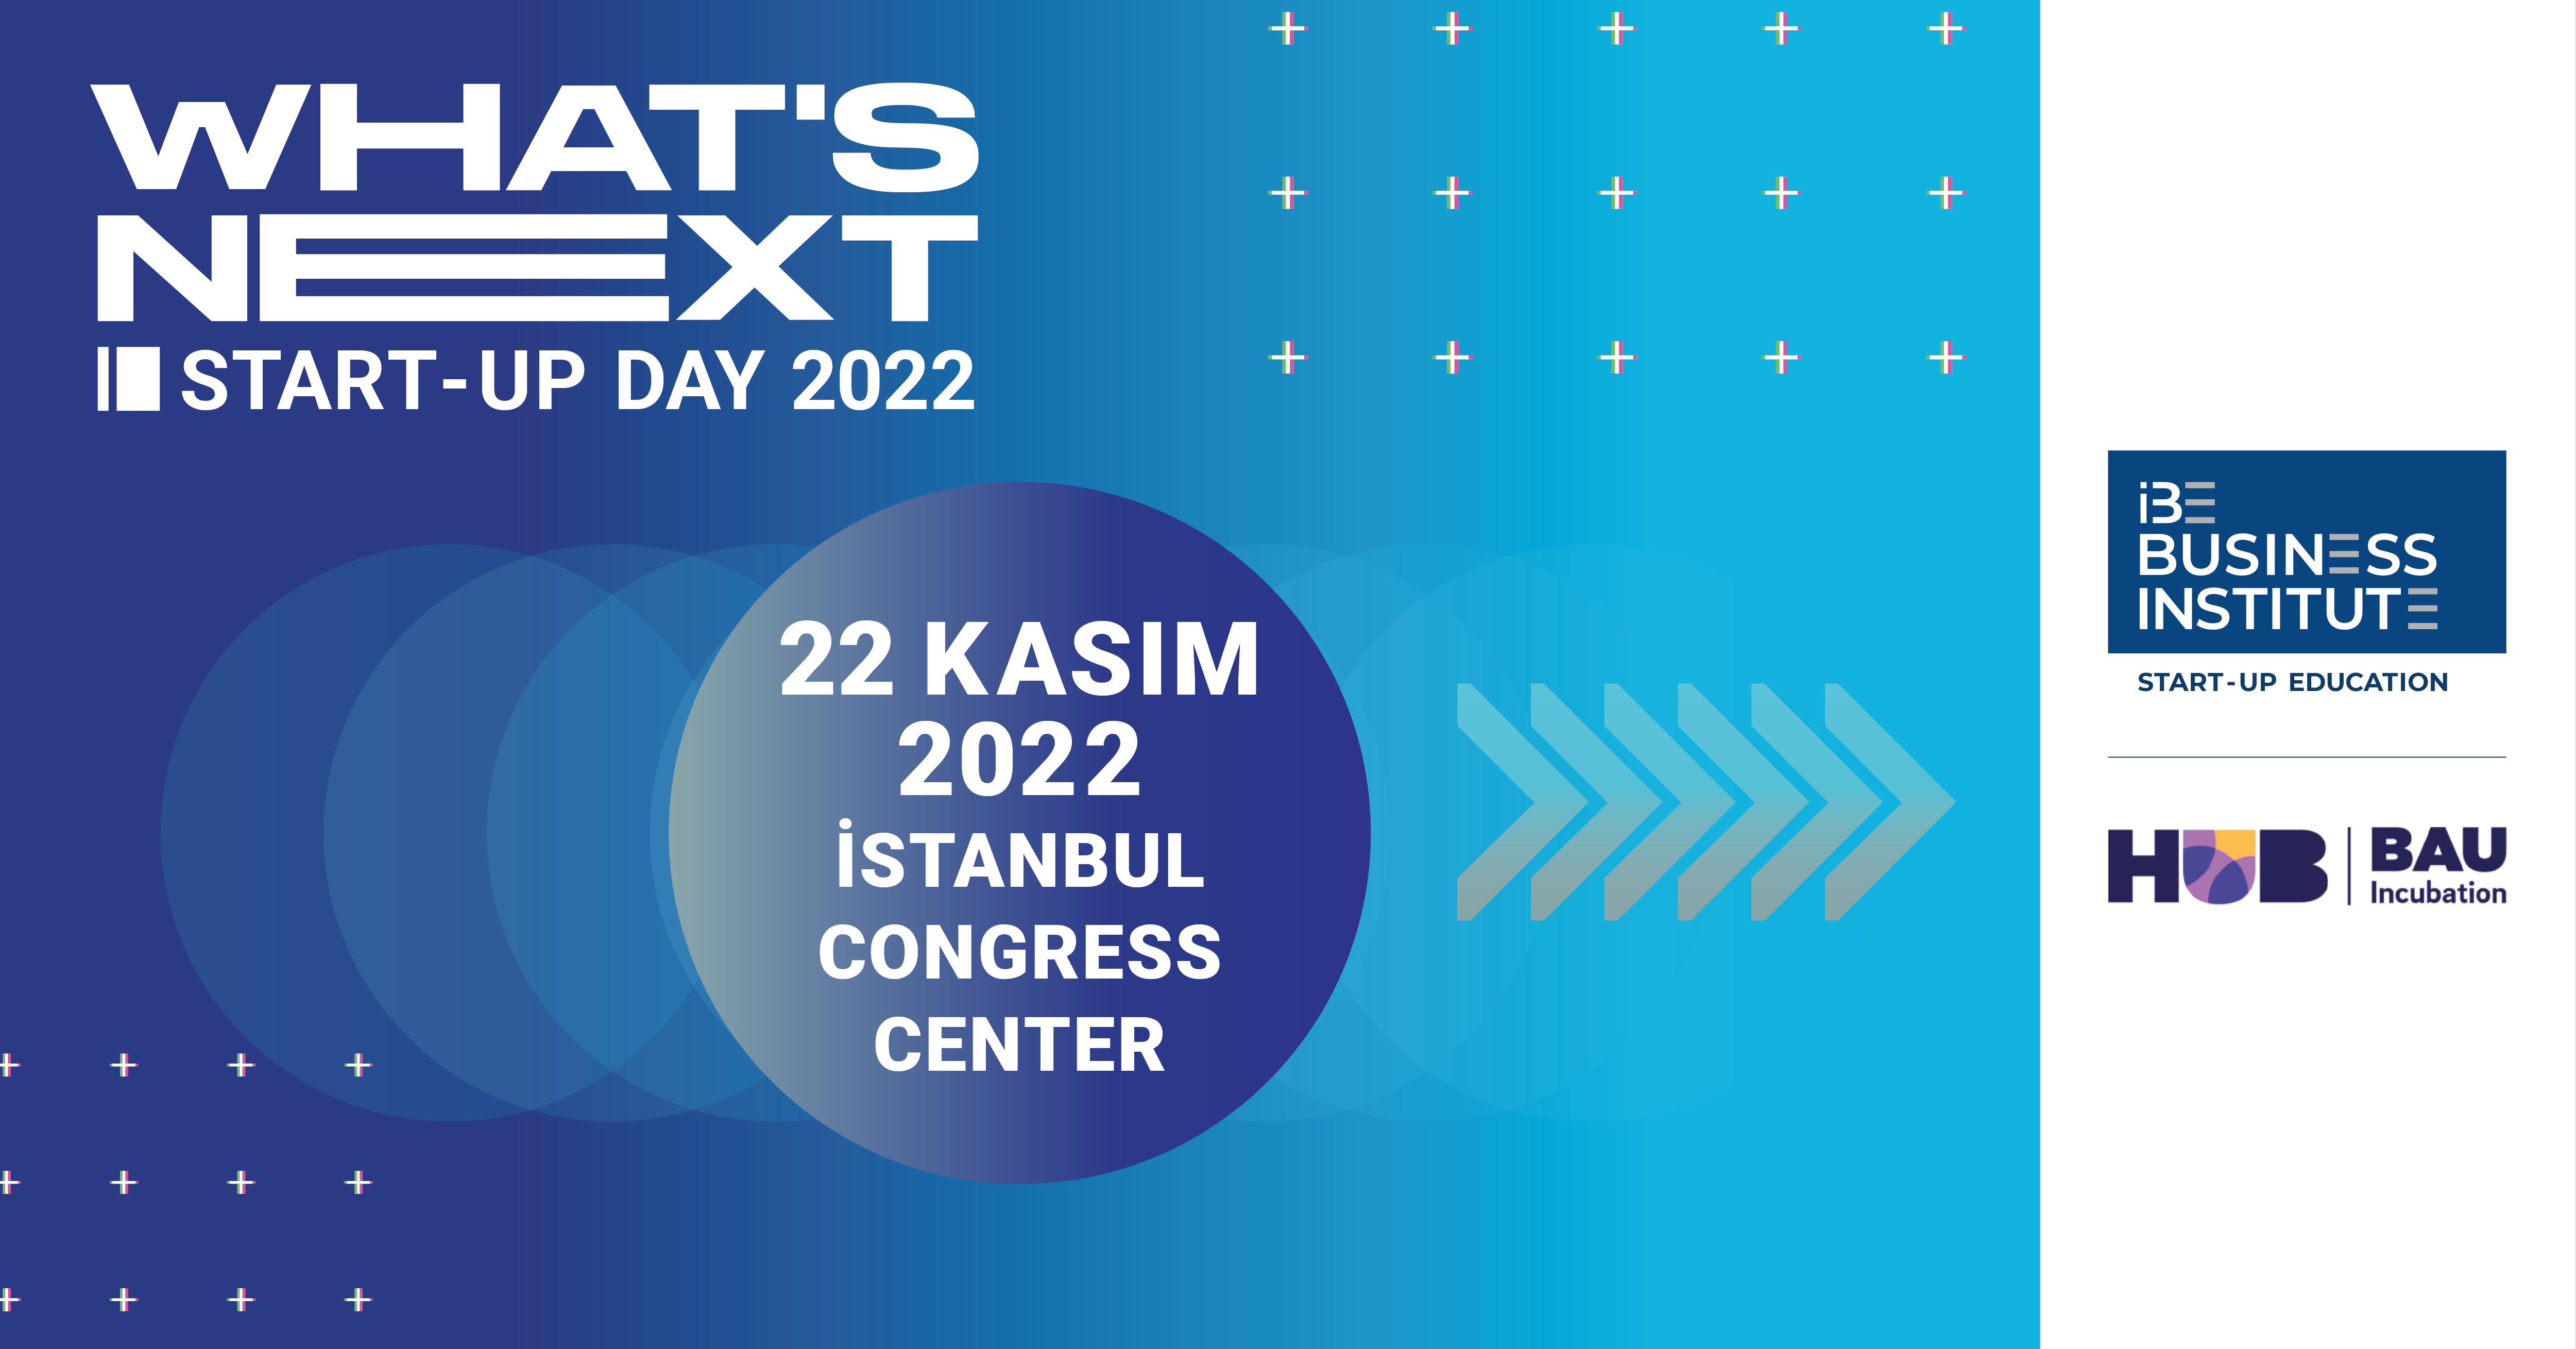 Start-Up Day 2022 / WHAT'S NEXT